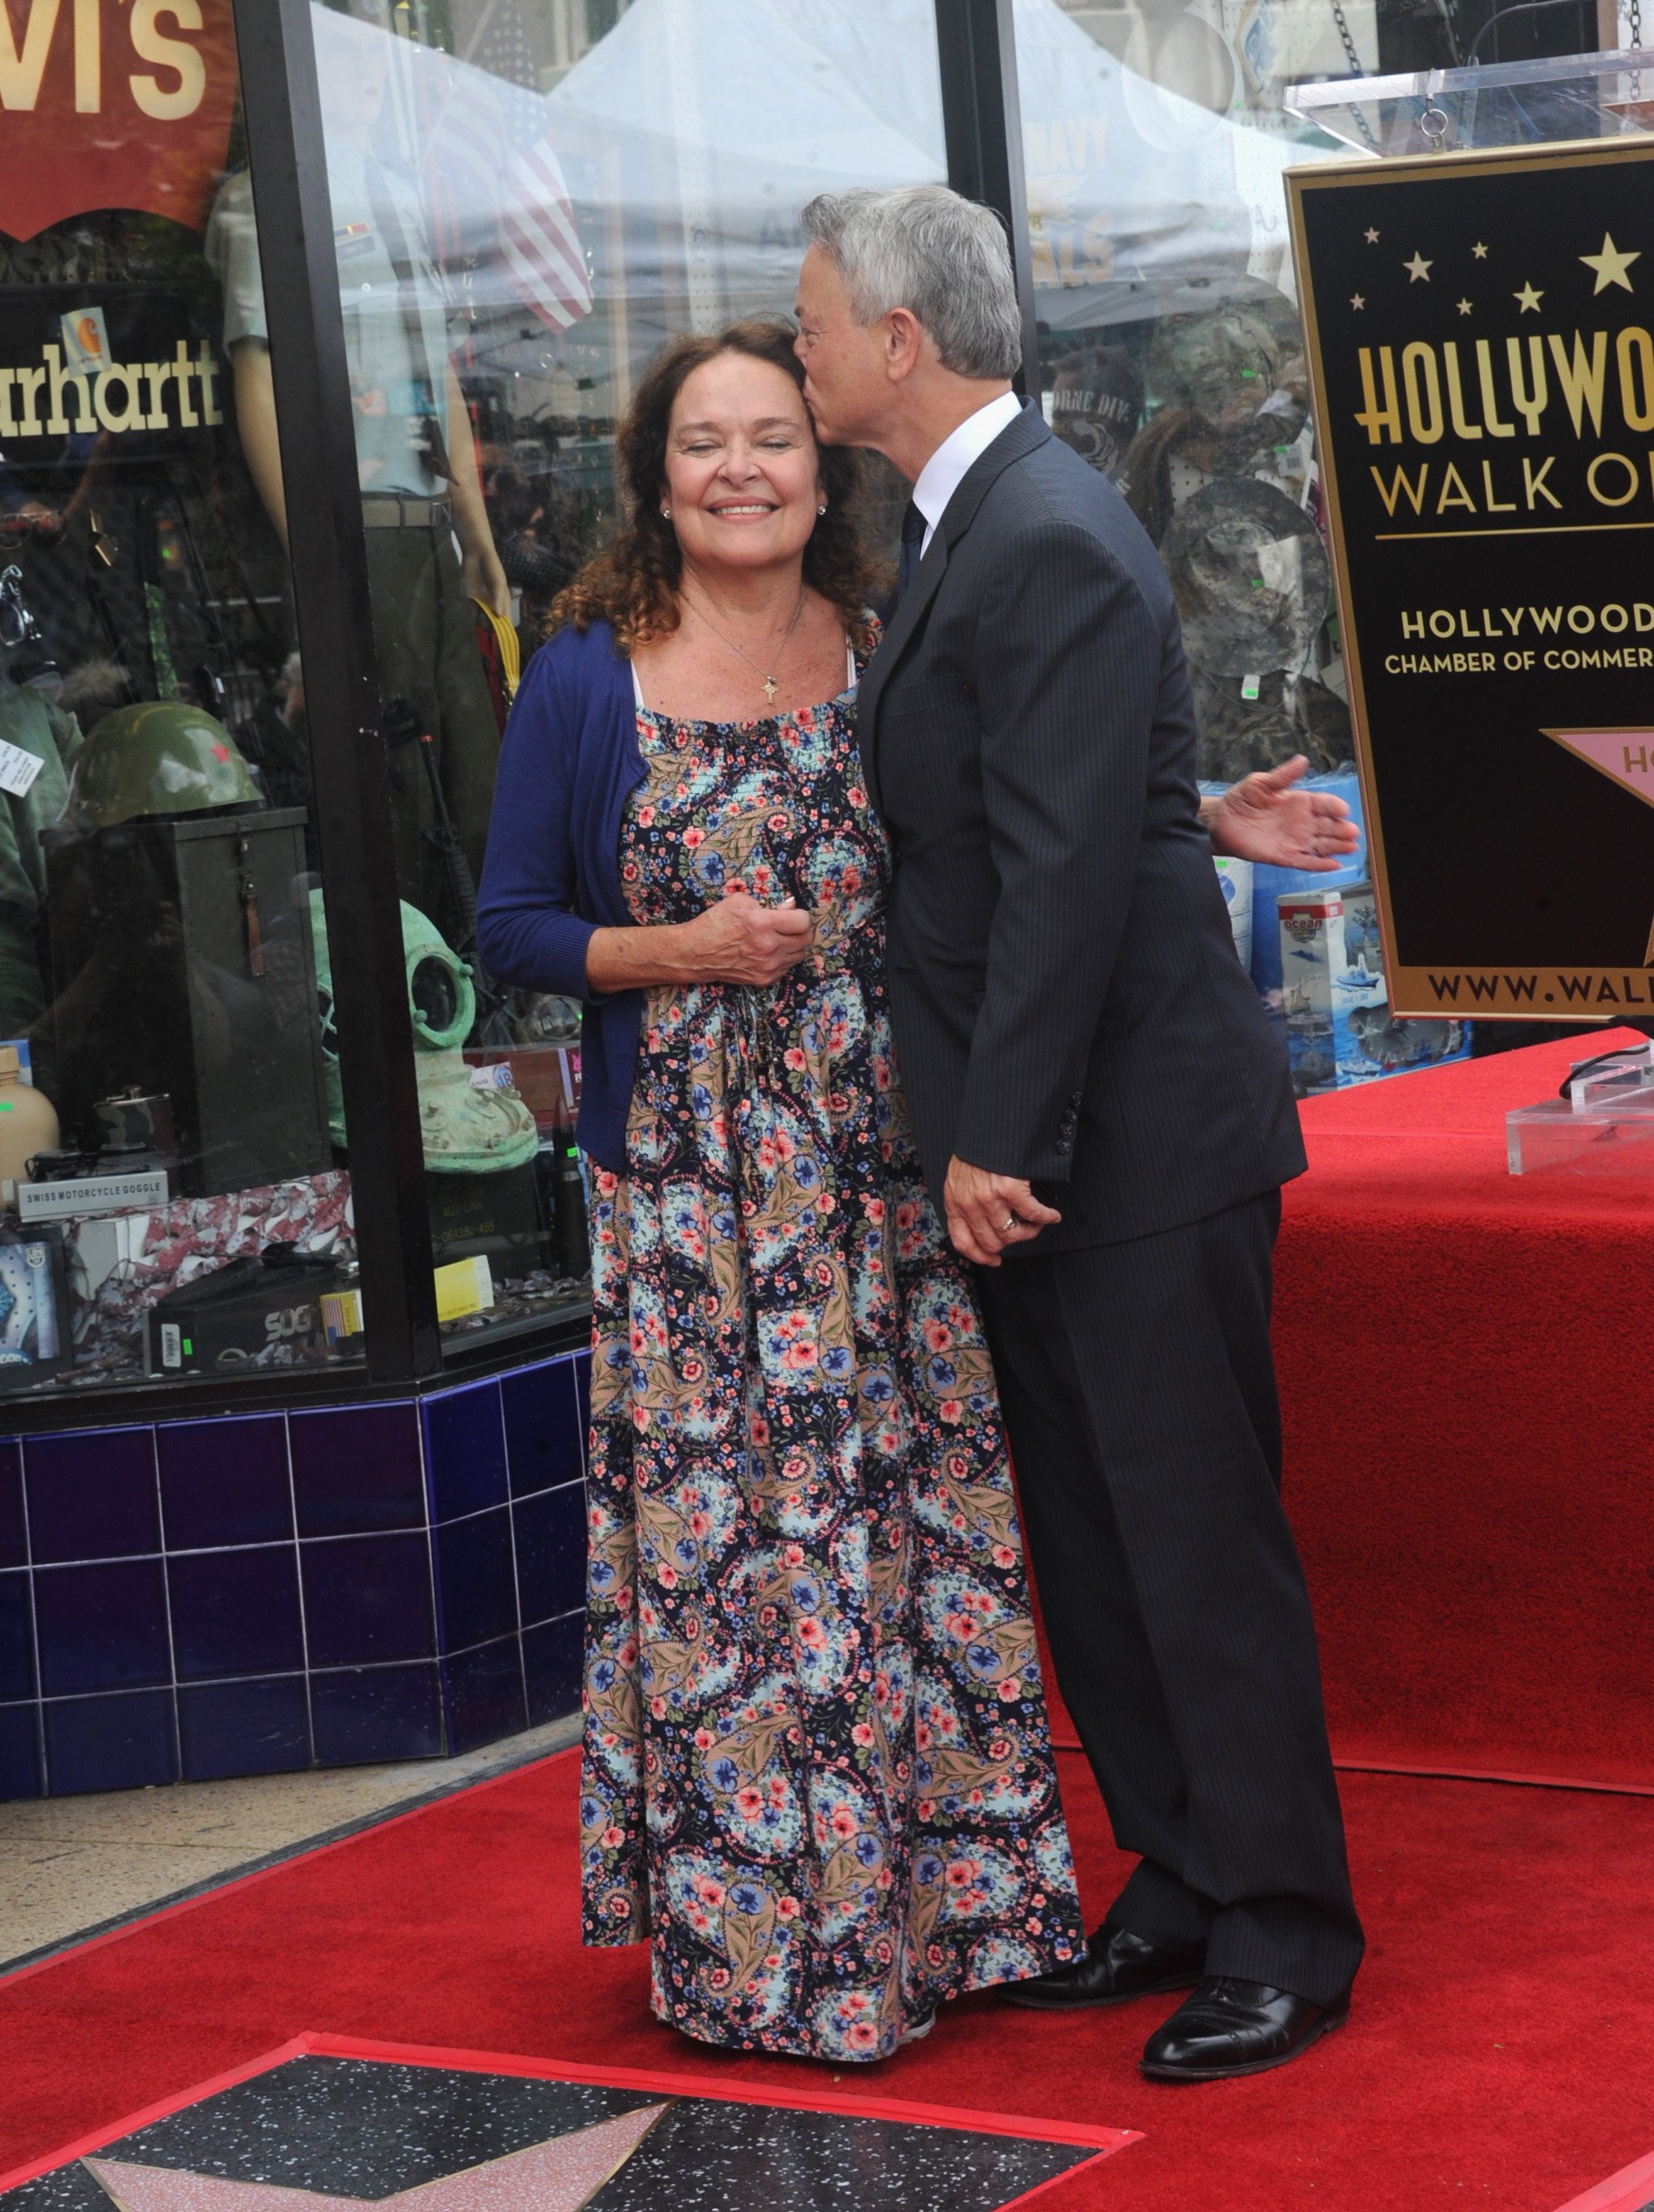 Gary Sinese and wife Moira Sinese at Gary Sinise's Star Ceremony On The Hollywood Walk Of Fame on April 17, 2017 in Hollywood, California | Source: Getty Images 